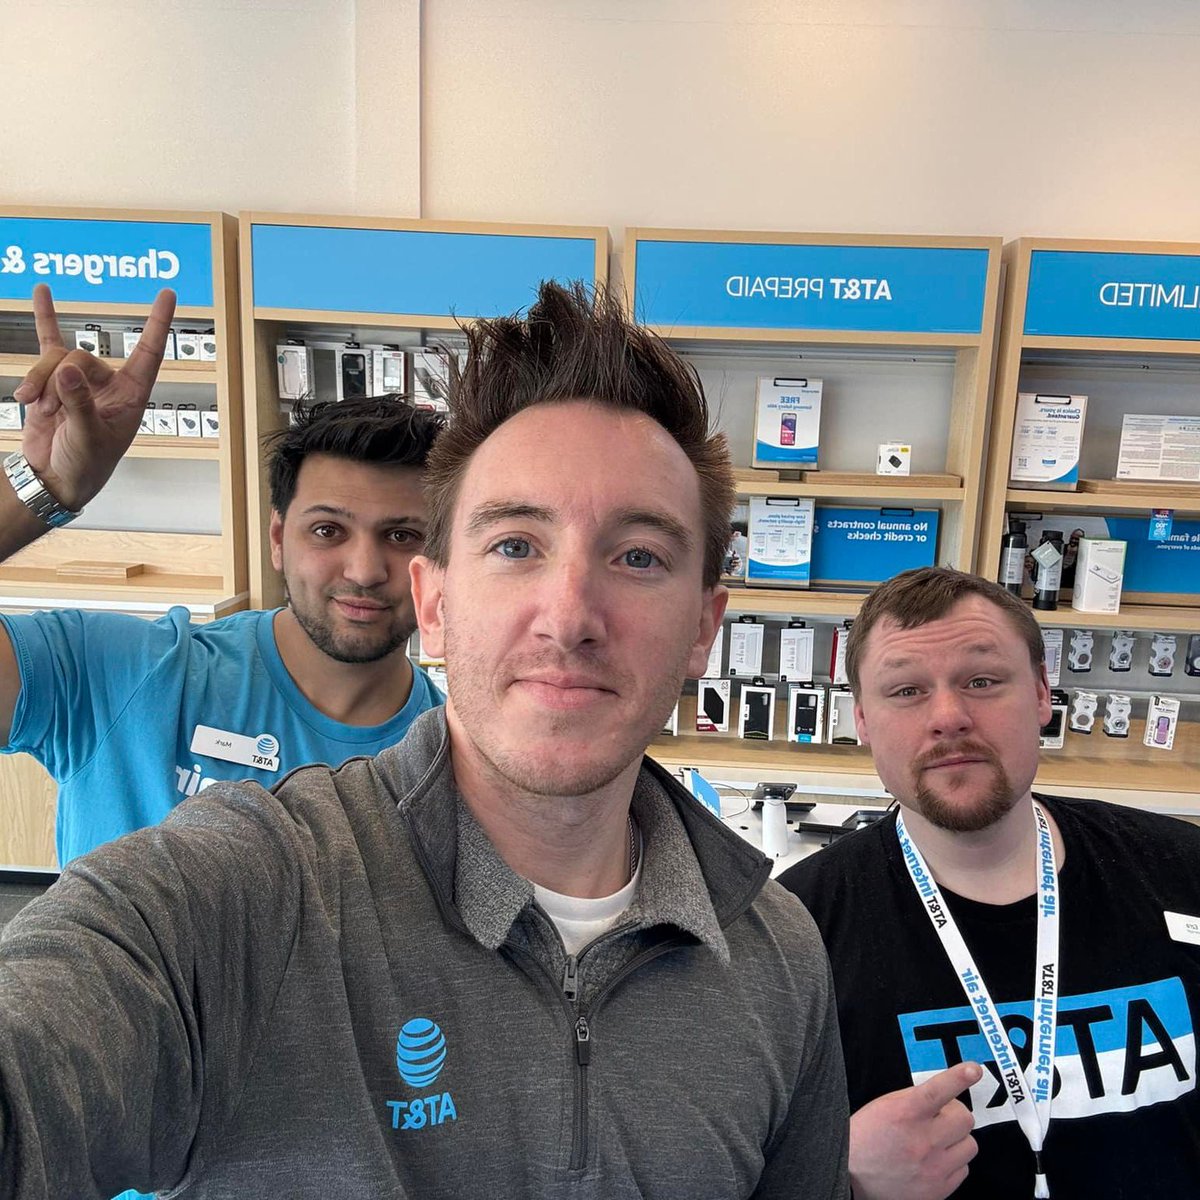 Happy #SelfieSunday from Morris Township, NJ! Our North Jersey DM Joel visited Soren and Kyle for some training and a selfie! Be sure to visit Morris Township and see what they have learned!